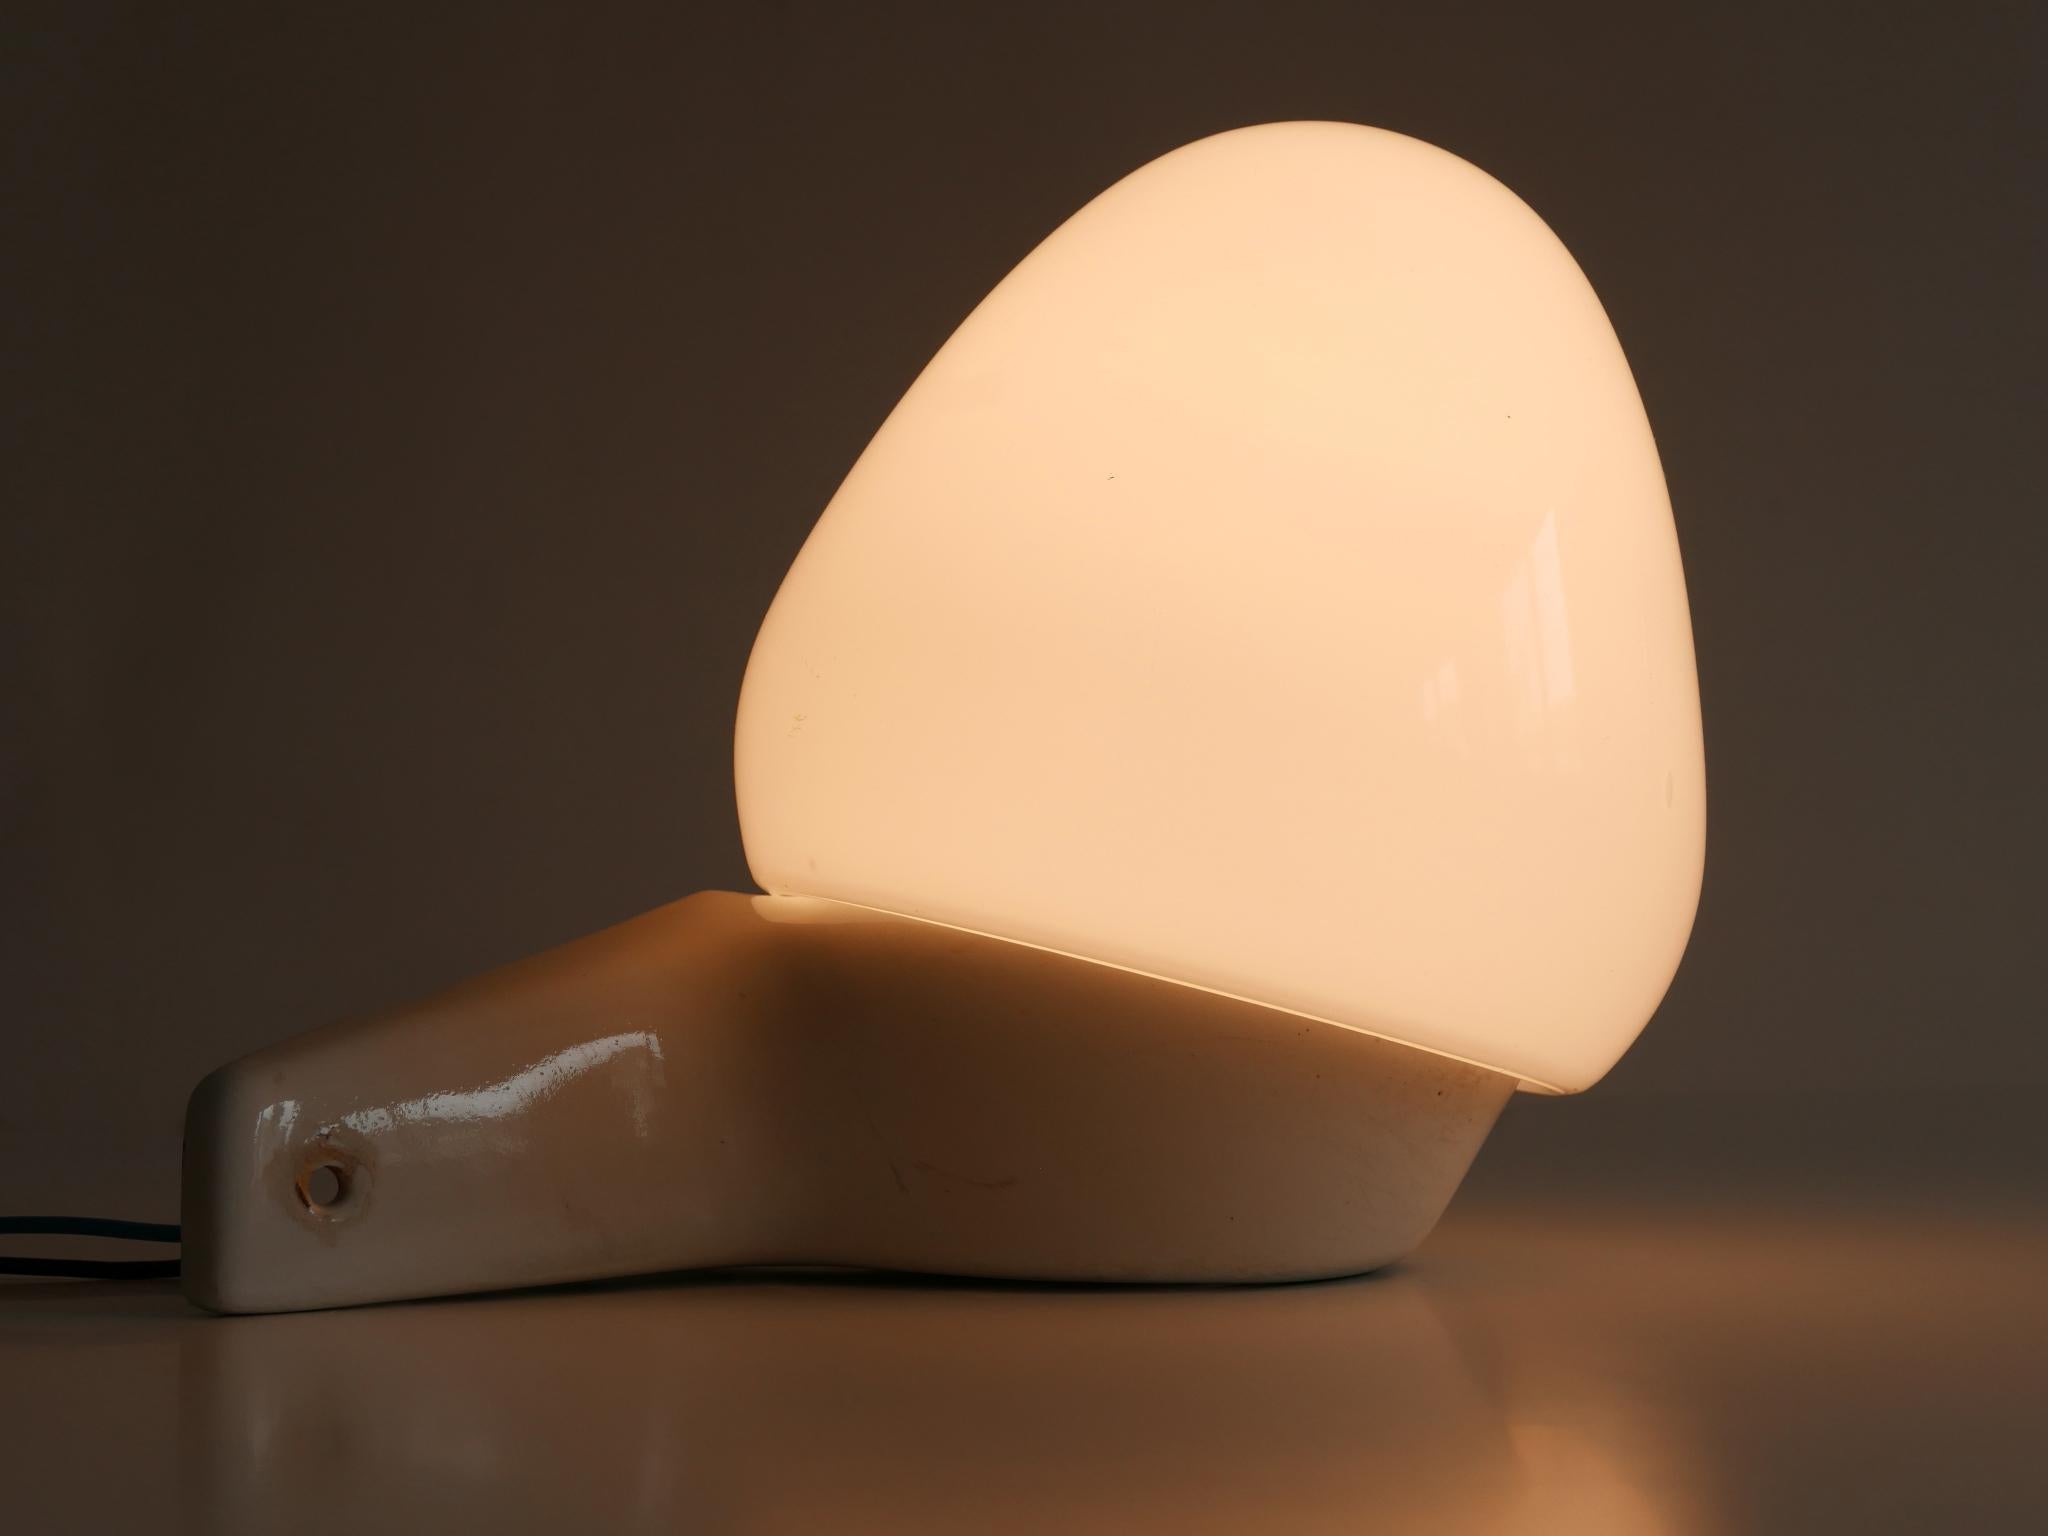 Elegant Mid-Century Modern corner wall light or sconce. Designed in 1950s by the famous German designer Wilhelm Wagenfeld. Manufactured by Lindner GmbH, Germany, 1950s.

Executed in glazed white ceramic and opaline glass, it comes with 1 x E27 / E26